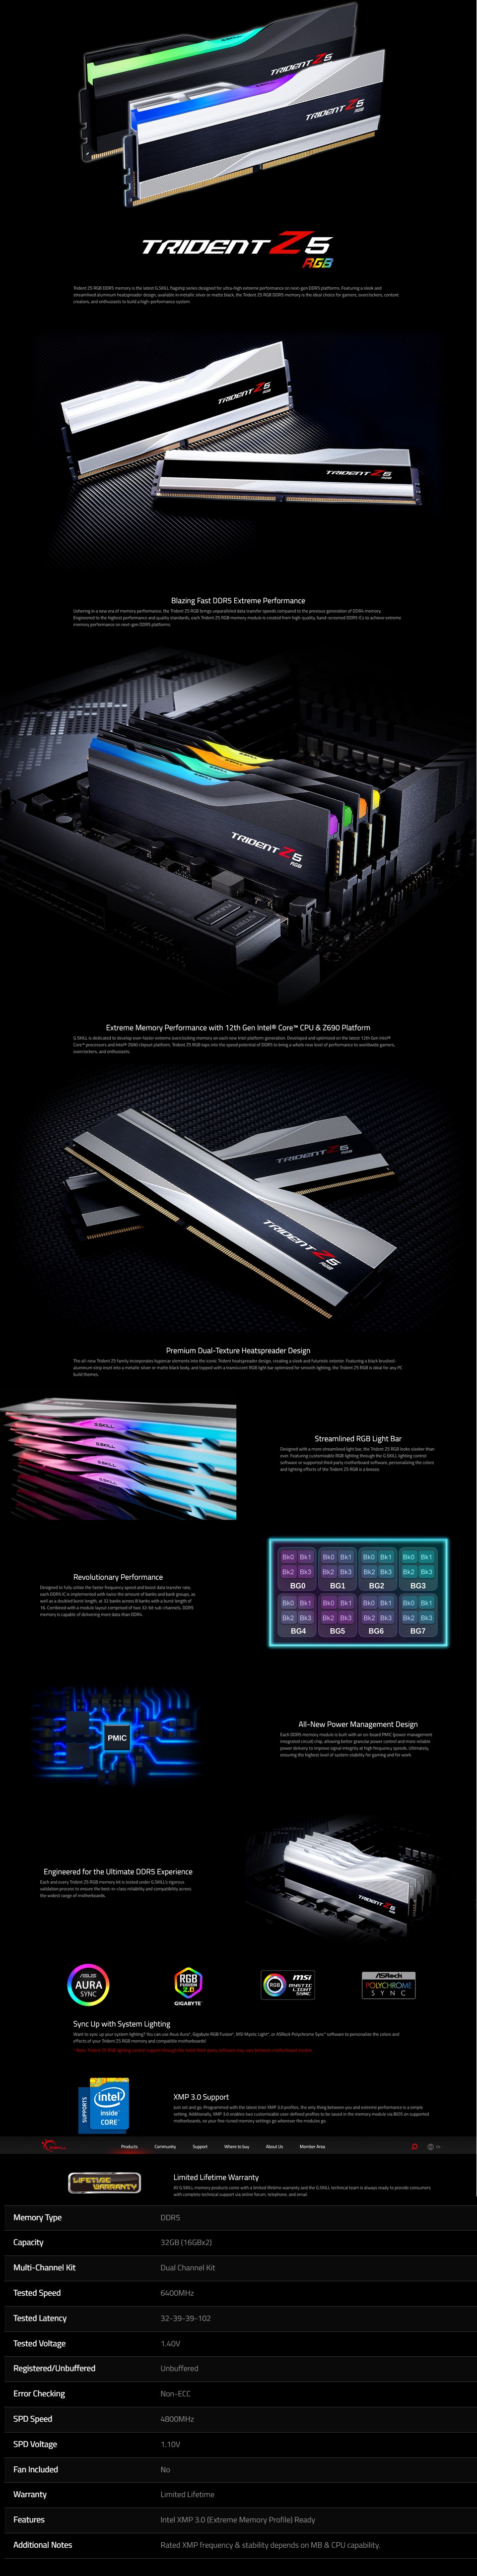 A large marketing image providing additional information about the product G.Skill 32GB Kit (2x16GB) DDR5 Trident Z5 RGB C32 6400MHz -  Black - Additional alt info not provided